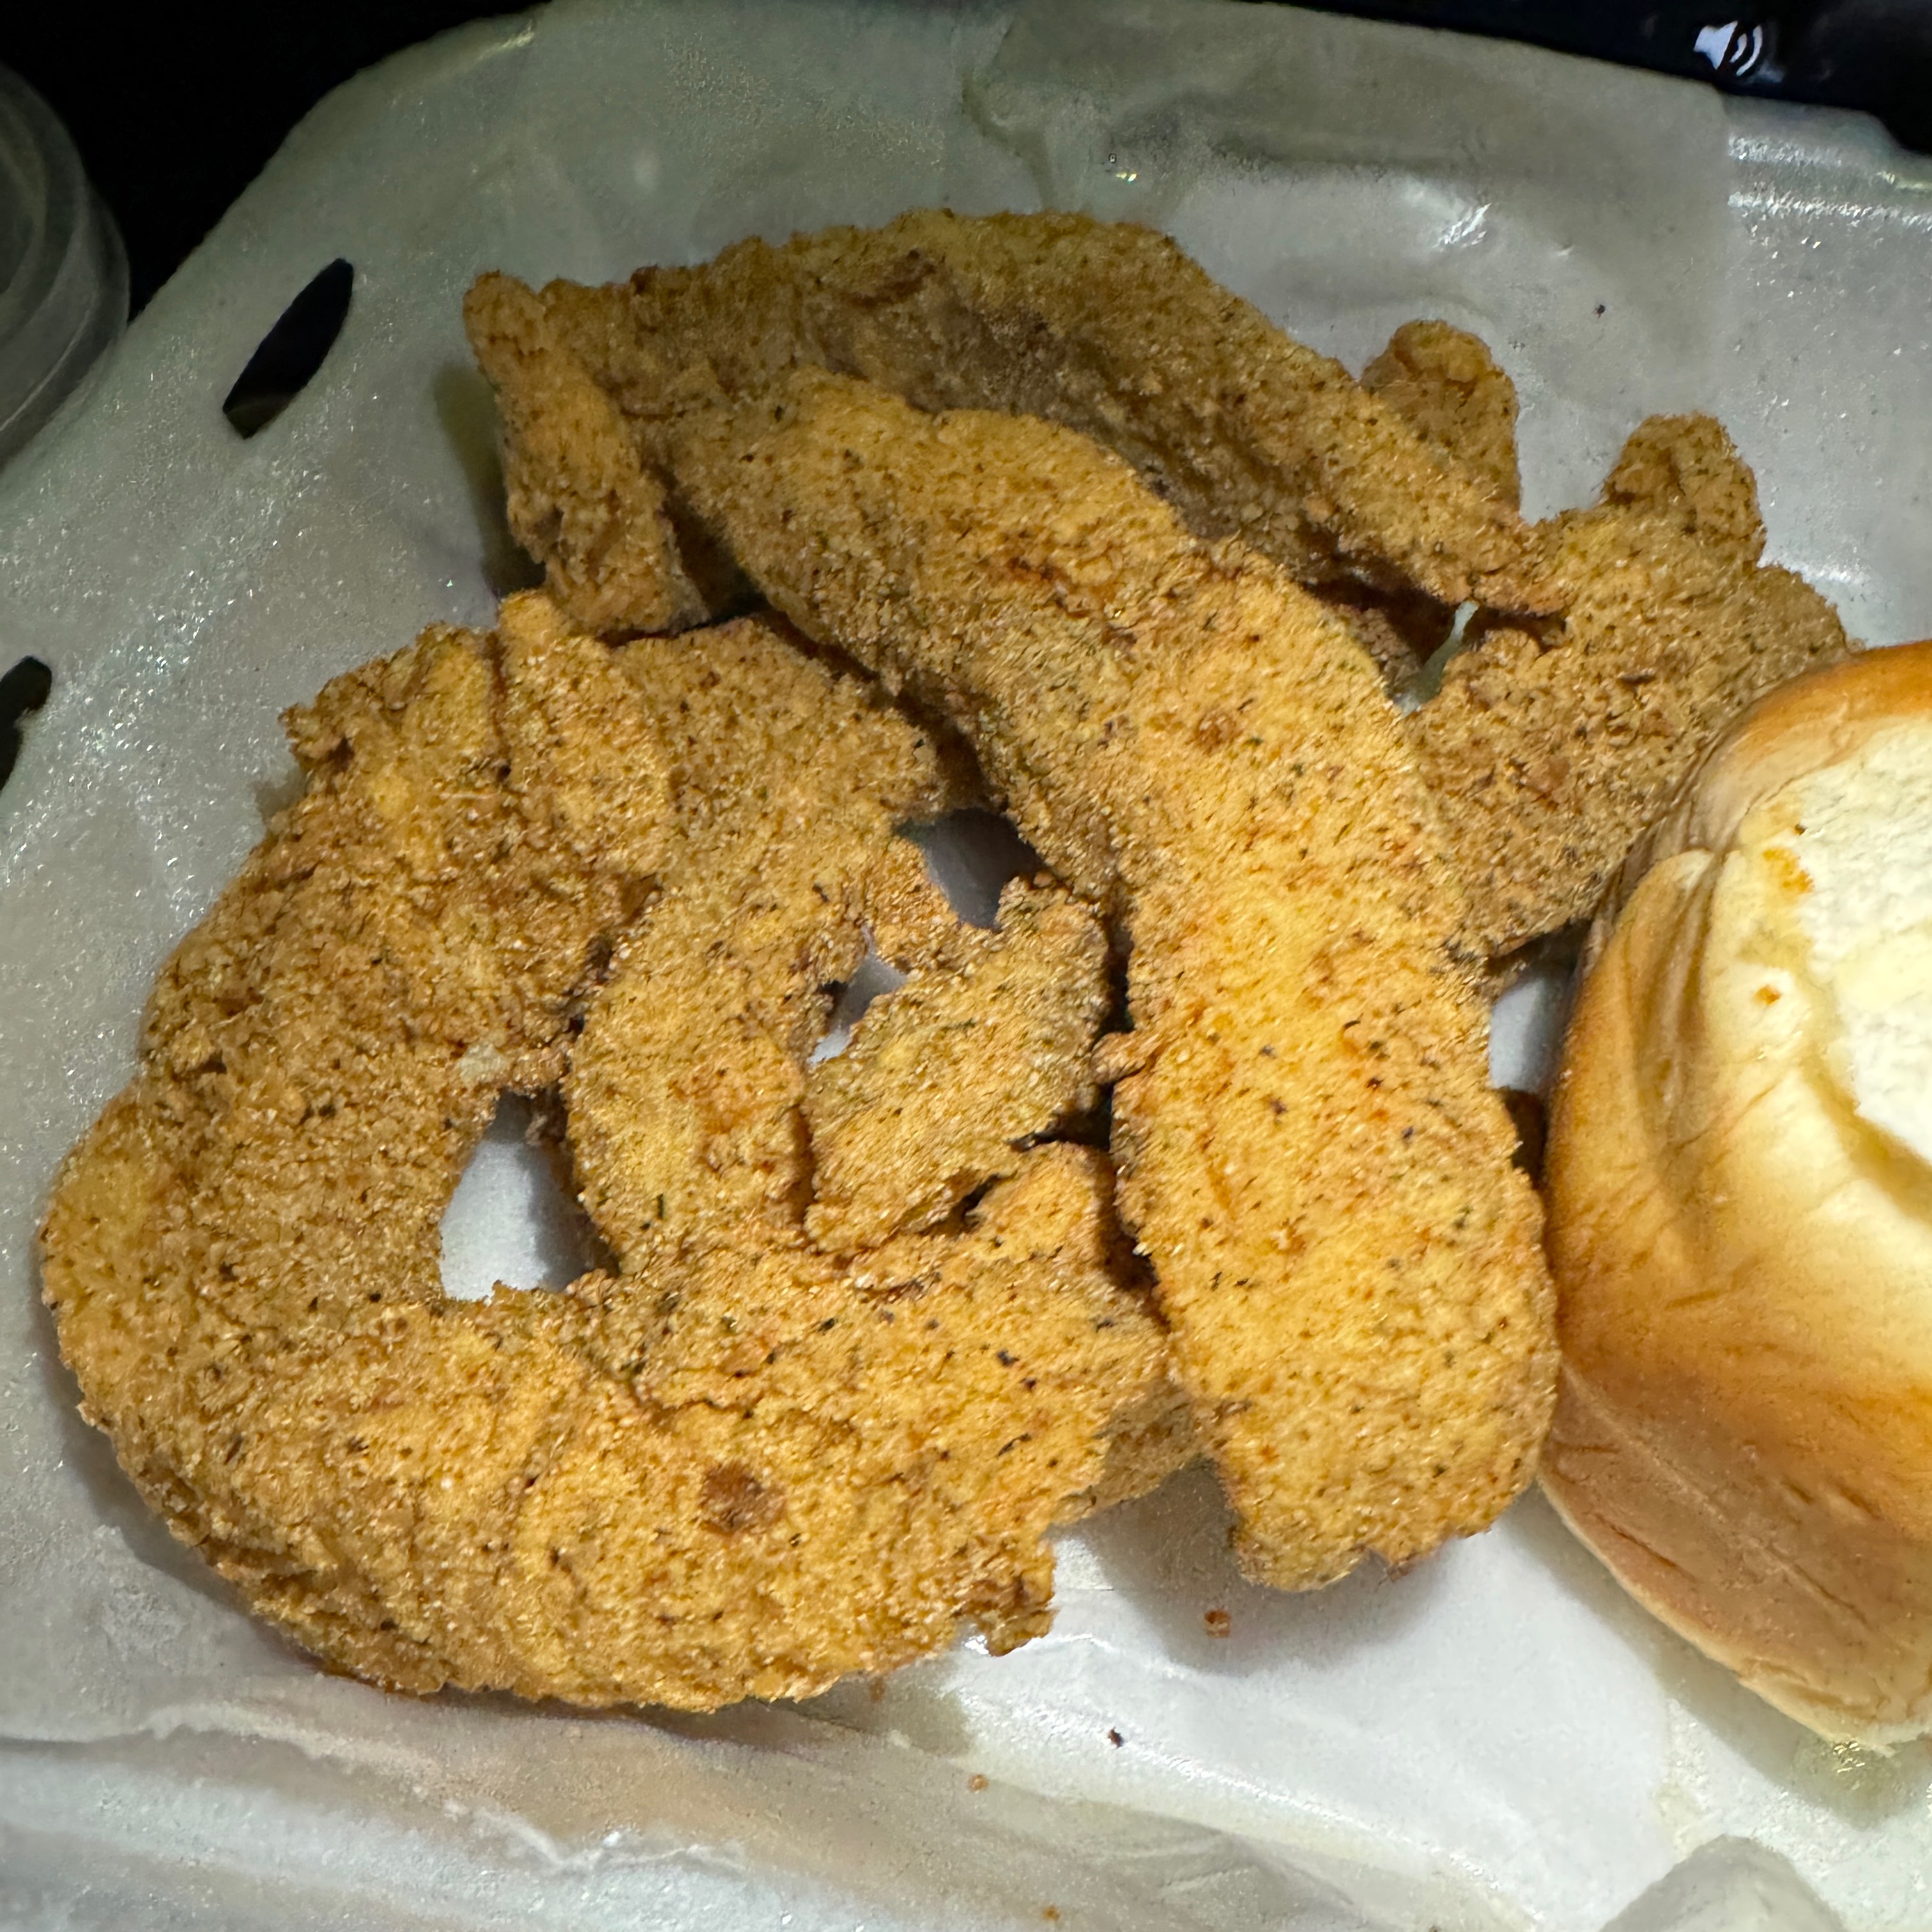 Fried Catfish Dinner $13.70 from Cw & Chris Chicken & Shrimp on #foodmento http://foodmento.com/dish/57395